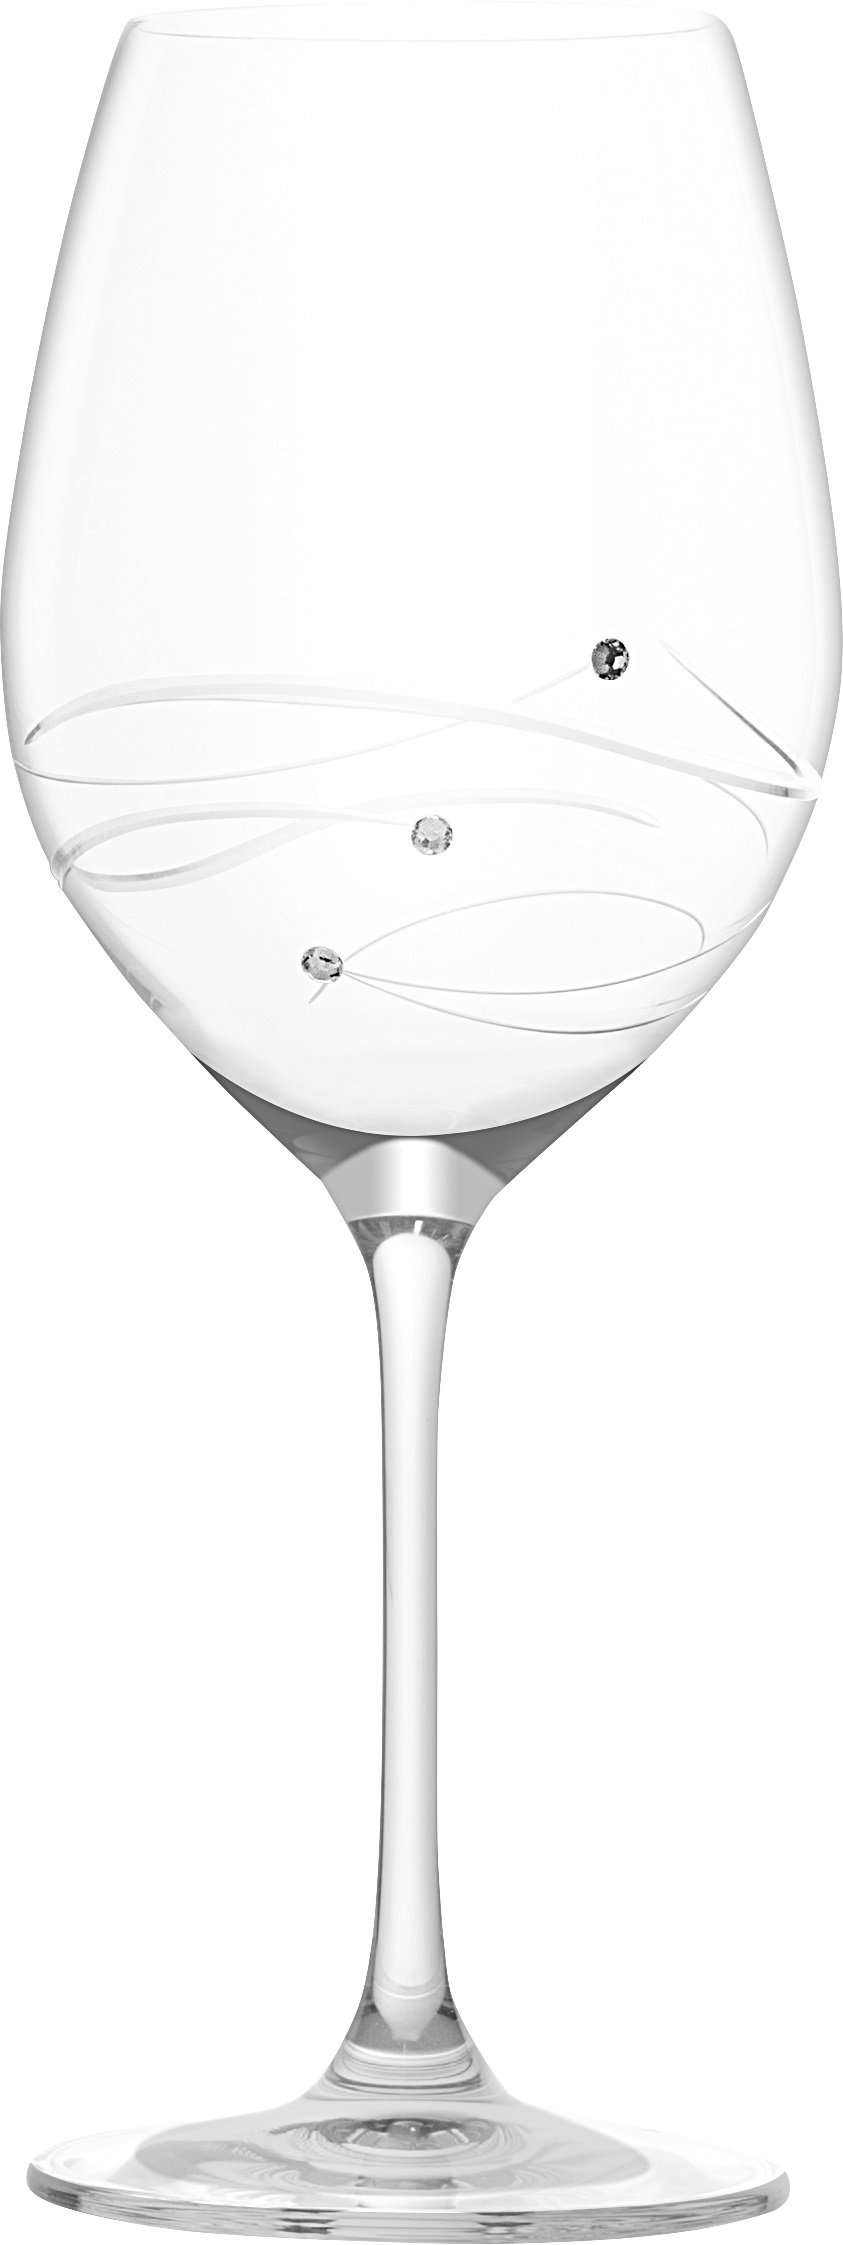 Barski - Handmade Glass - Set of 4 White Wine Glasses with Empty Space in the Center to Fit Your Own Bottle of Wine - Decorated with Real Swarovski Diamonds - Gift Boxed - 12.5 oz.- Made in Europe